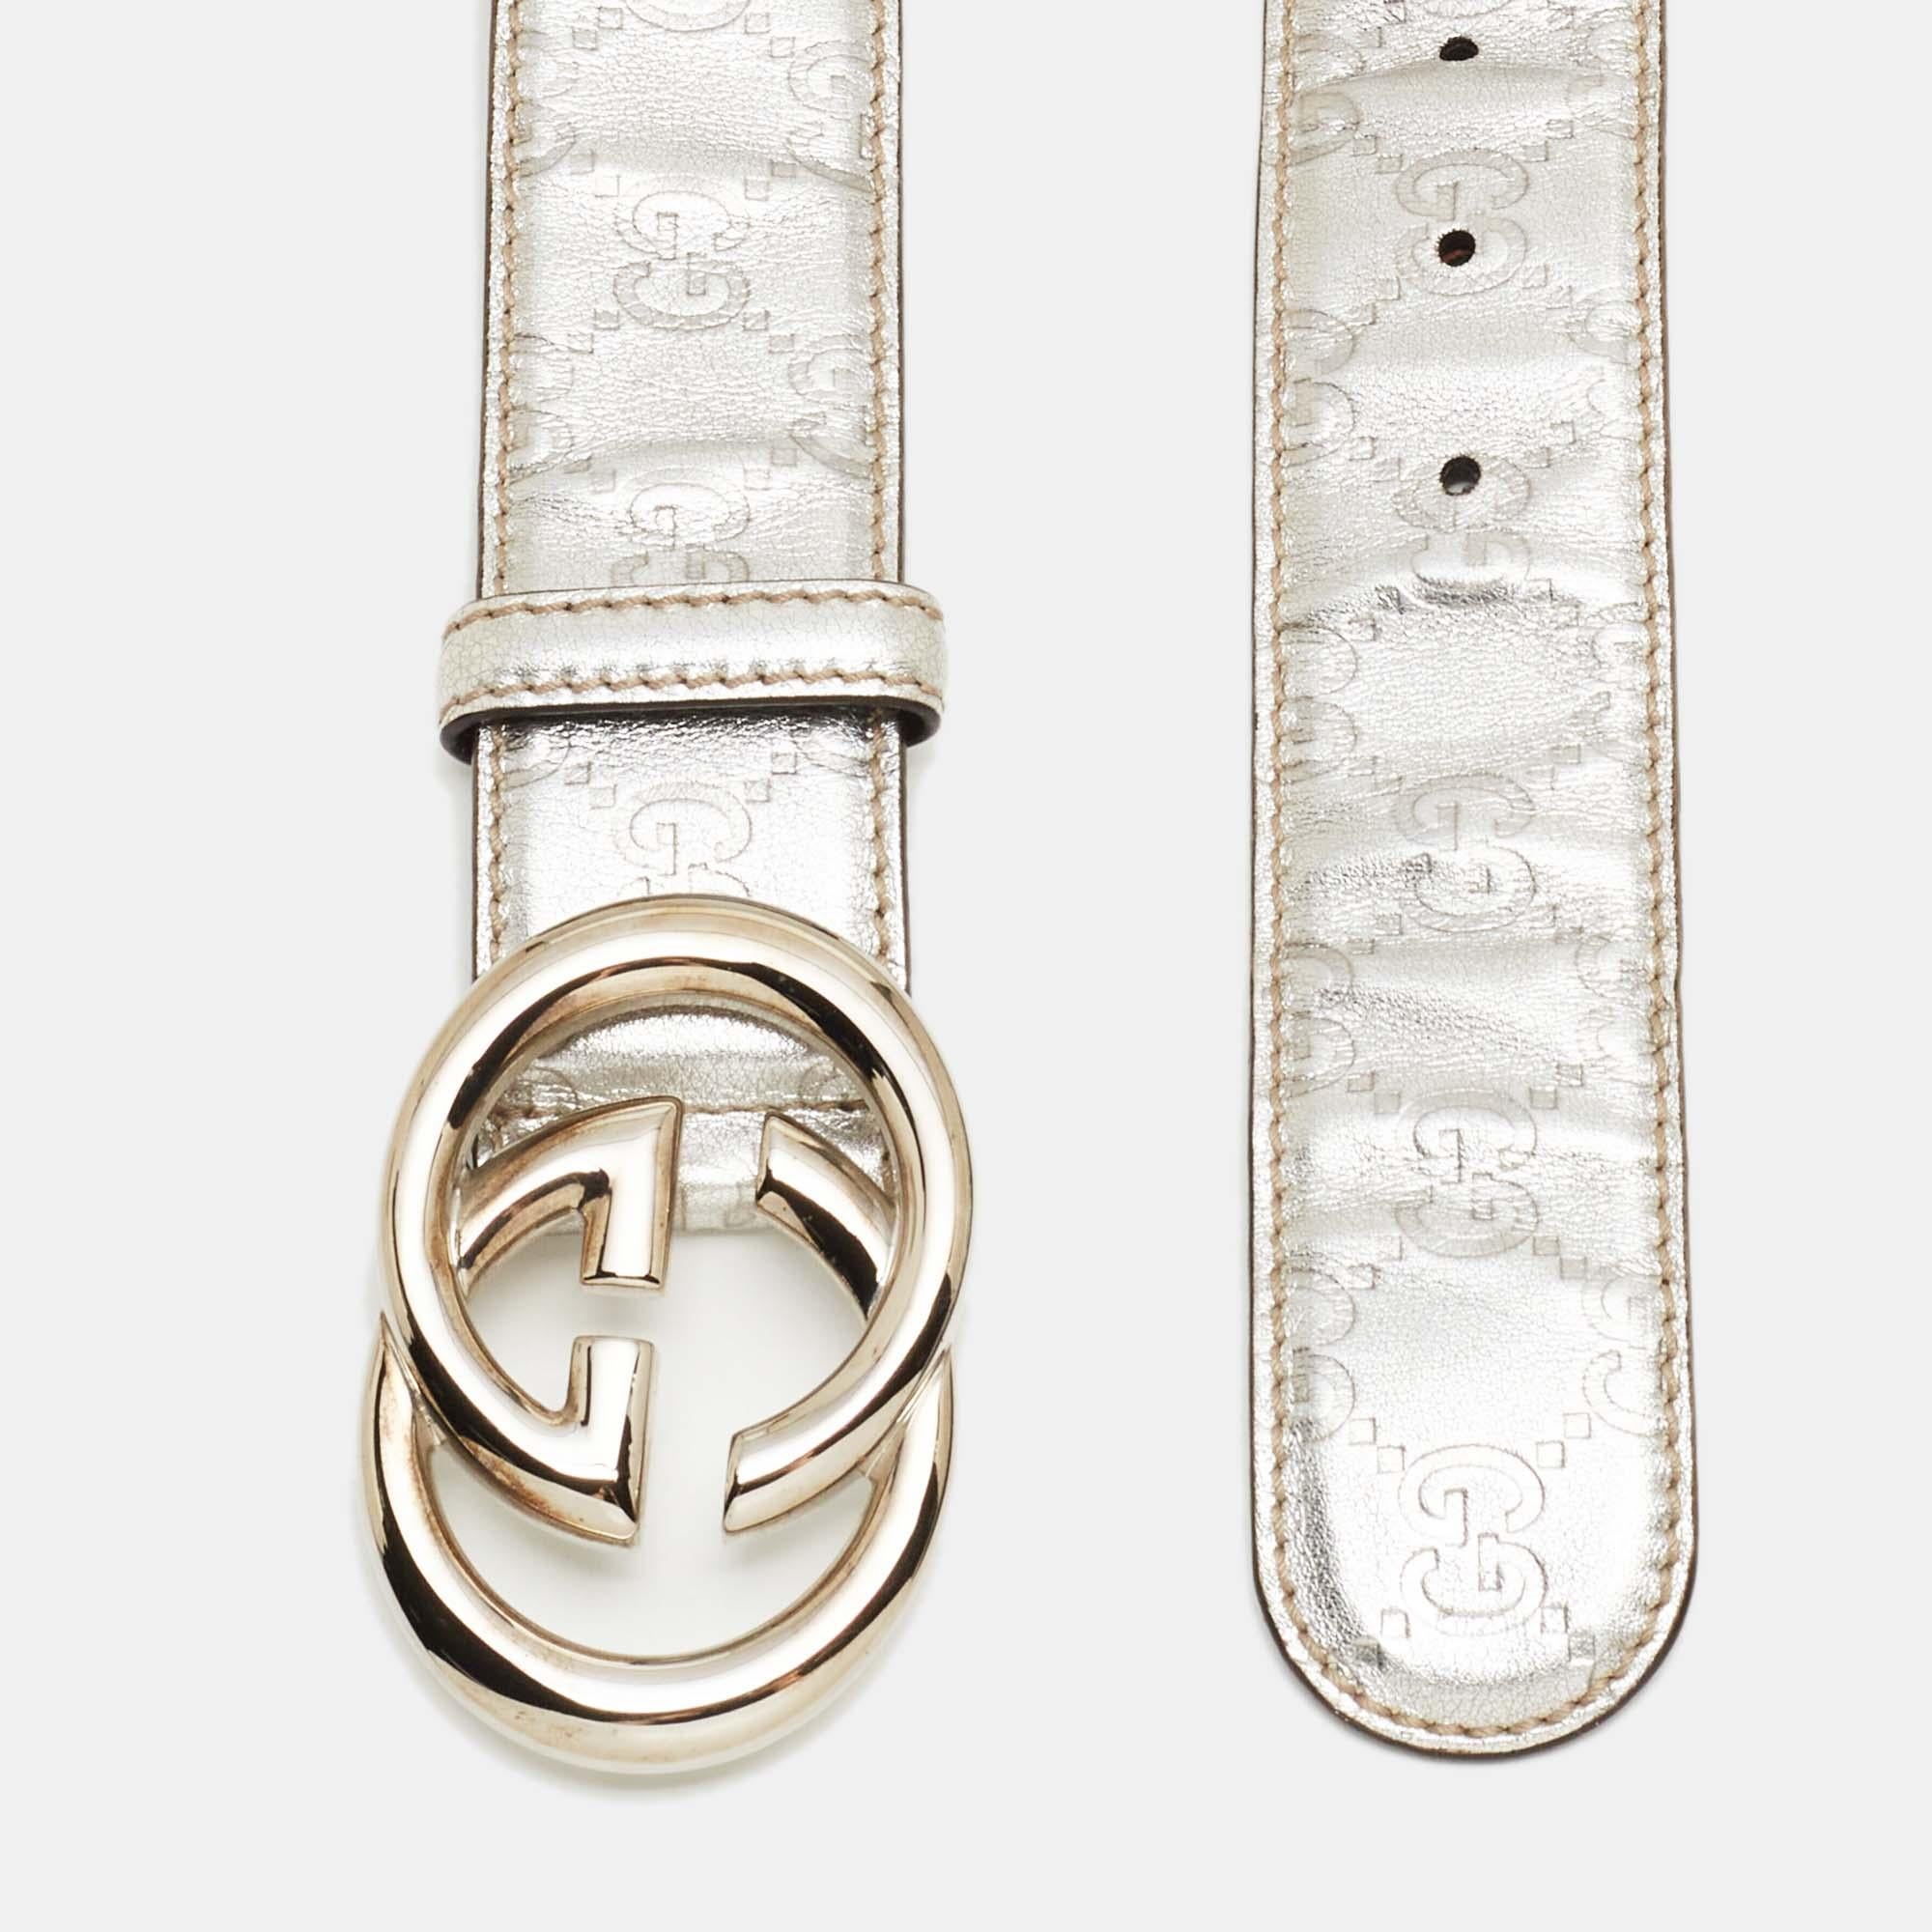 Give your belt collection a luxe update with this Gucci creation. The silver piece is crafted from Guccissima leather and detailed with the interlocking G buckle in silver-tone metal. It is equipped with a single loop and will look great with your